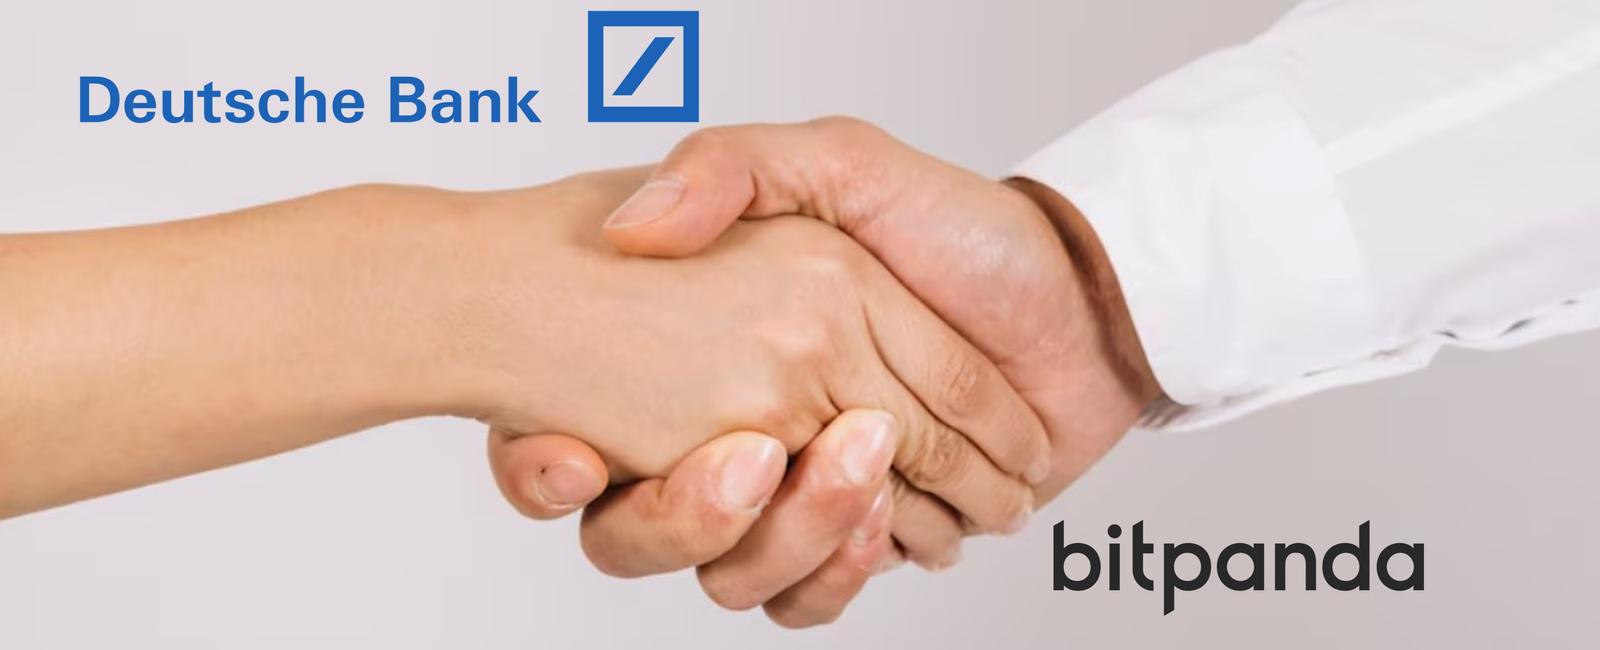 Deutsche Bank and Bitpanda Forge New Deal to Streamline Crypto Transactions